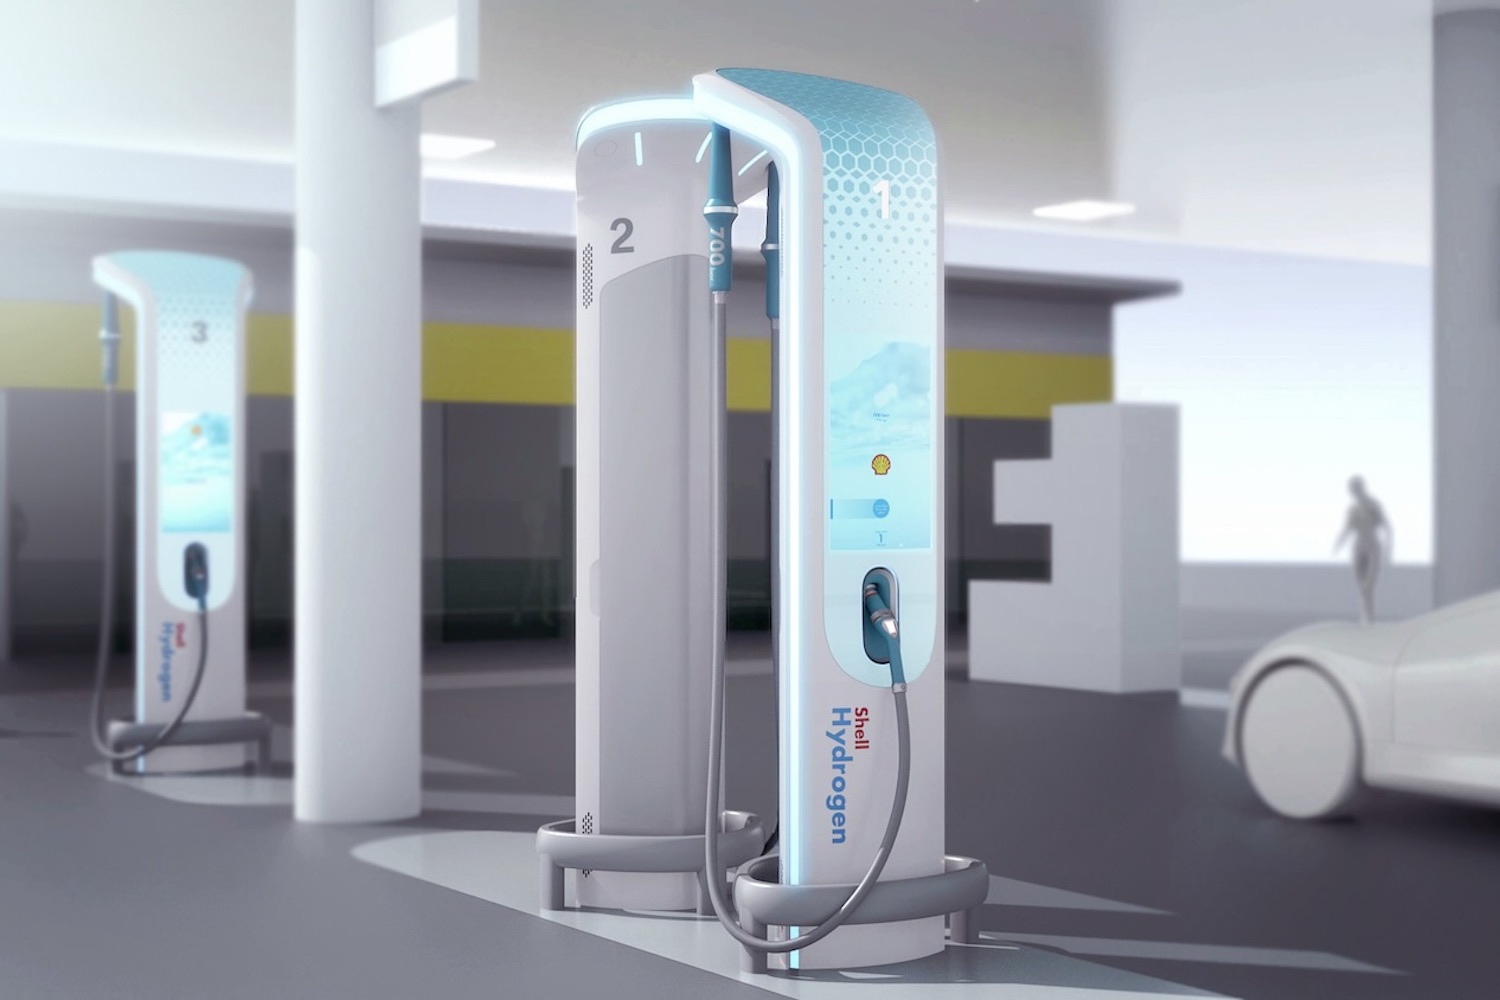 EV charging stations rendering by BMW Designworks in a fictitious parking garage.